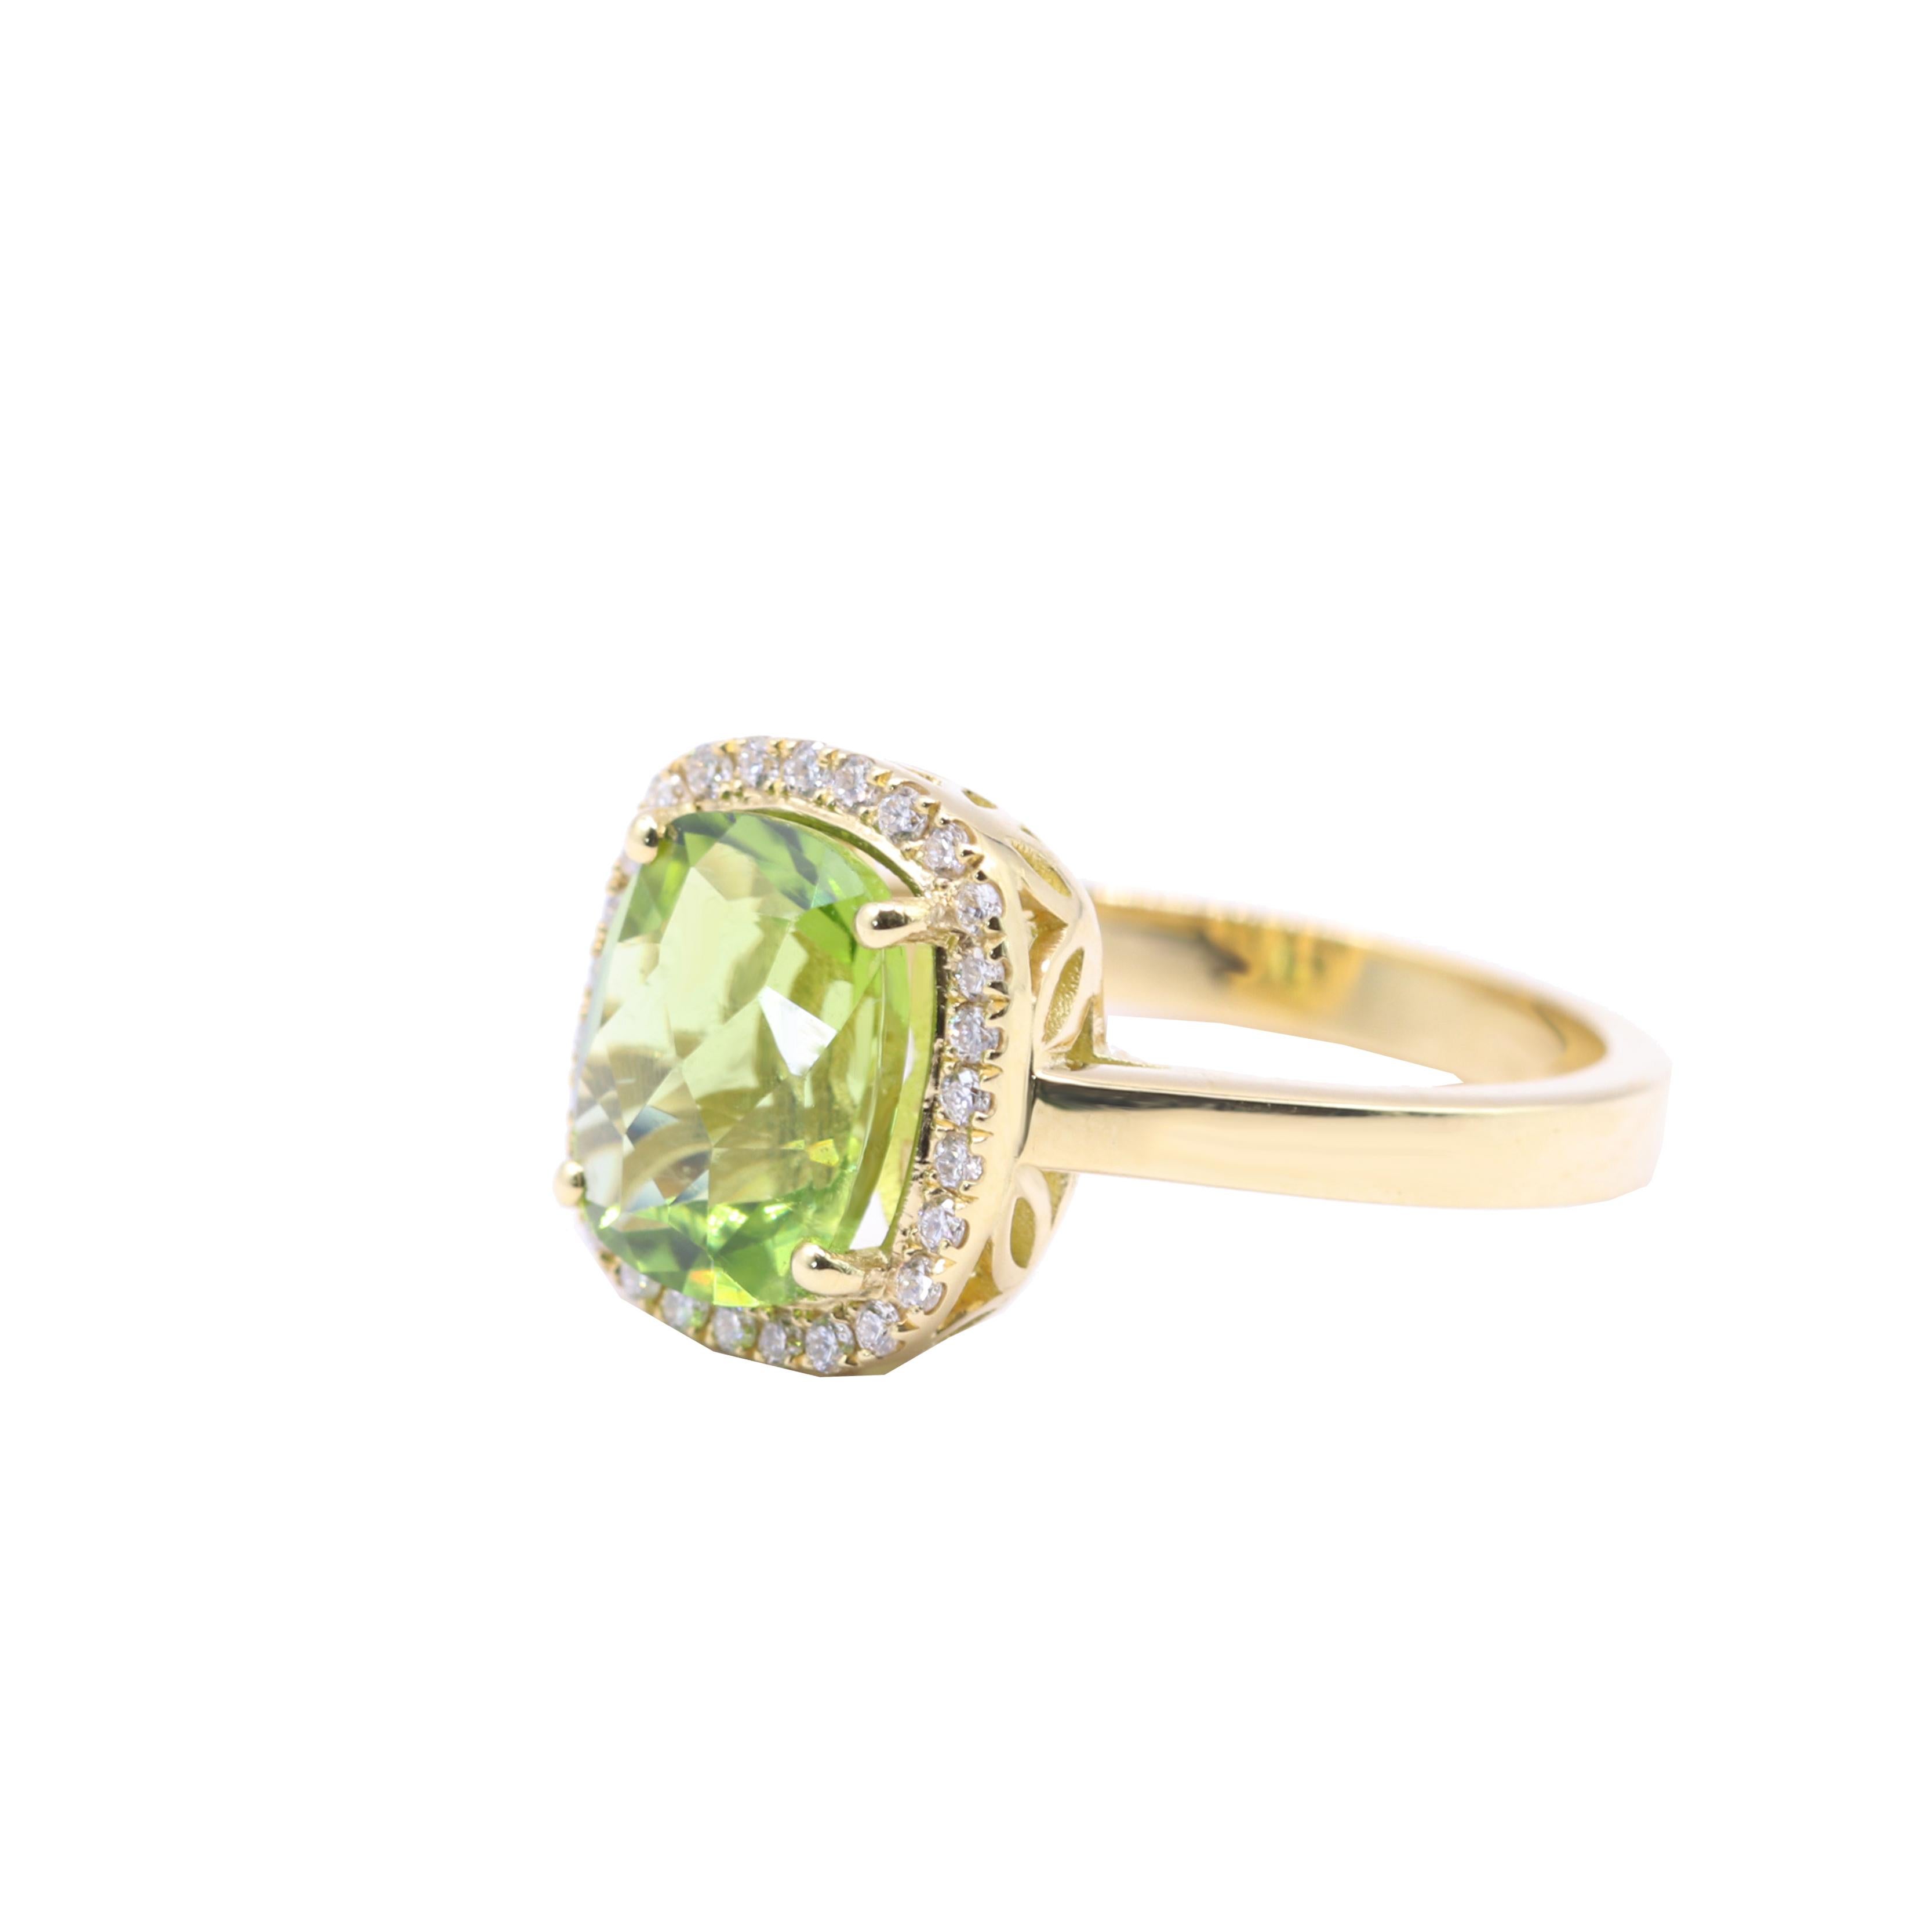 S.Georgios designer presents an oval shape 2.95 Carats Peridot ring with a White Diamond Bezel with a total weight of 0.14 Carats. This simple yet stunning ring is handmade from 18 Karat Yellow gold in Athens Greece. The ring features a beautiful